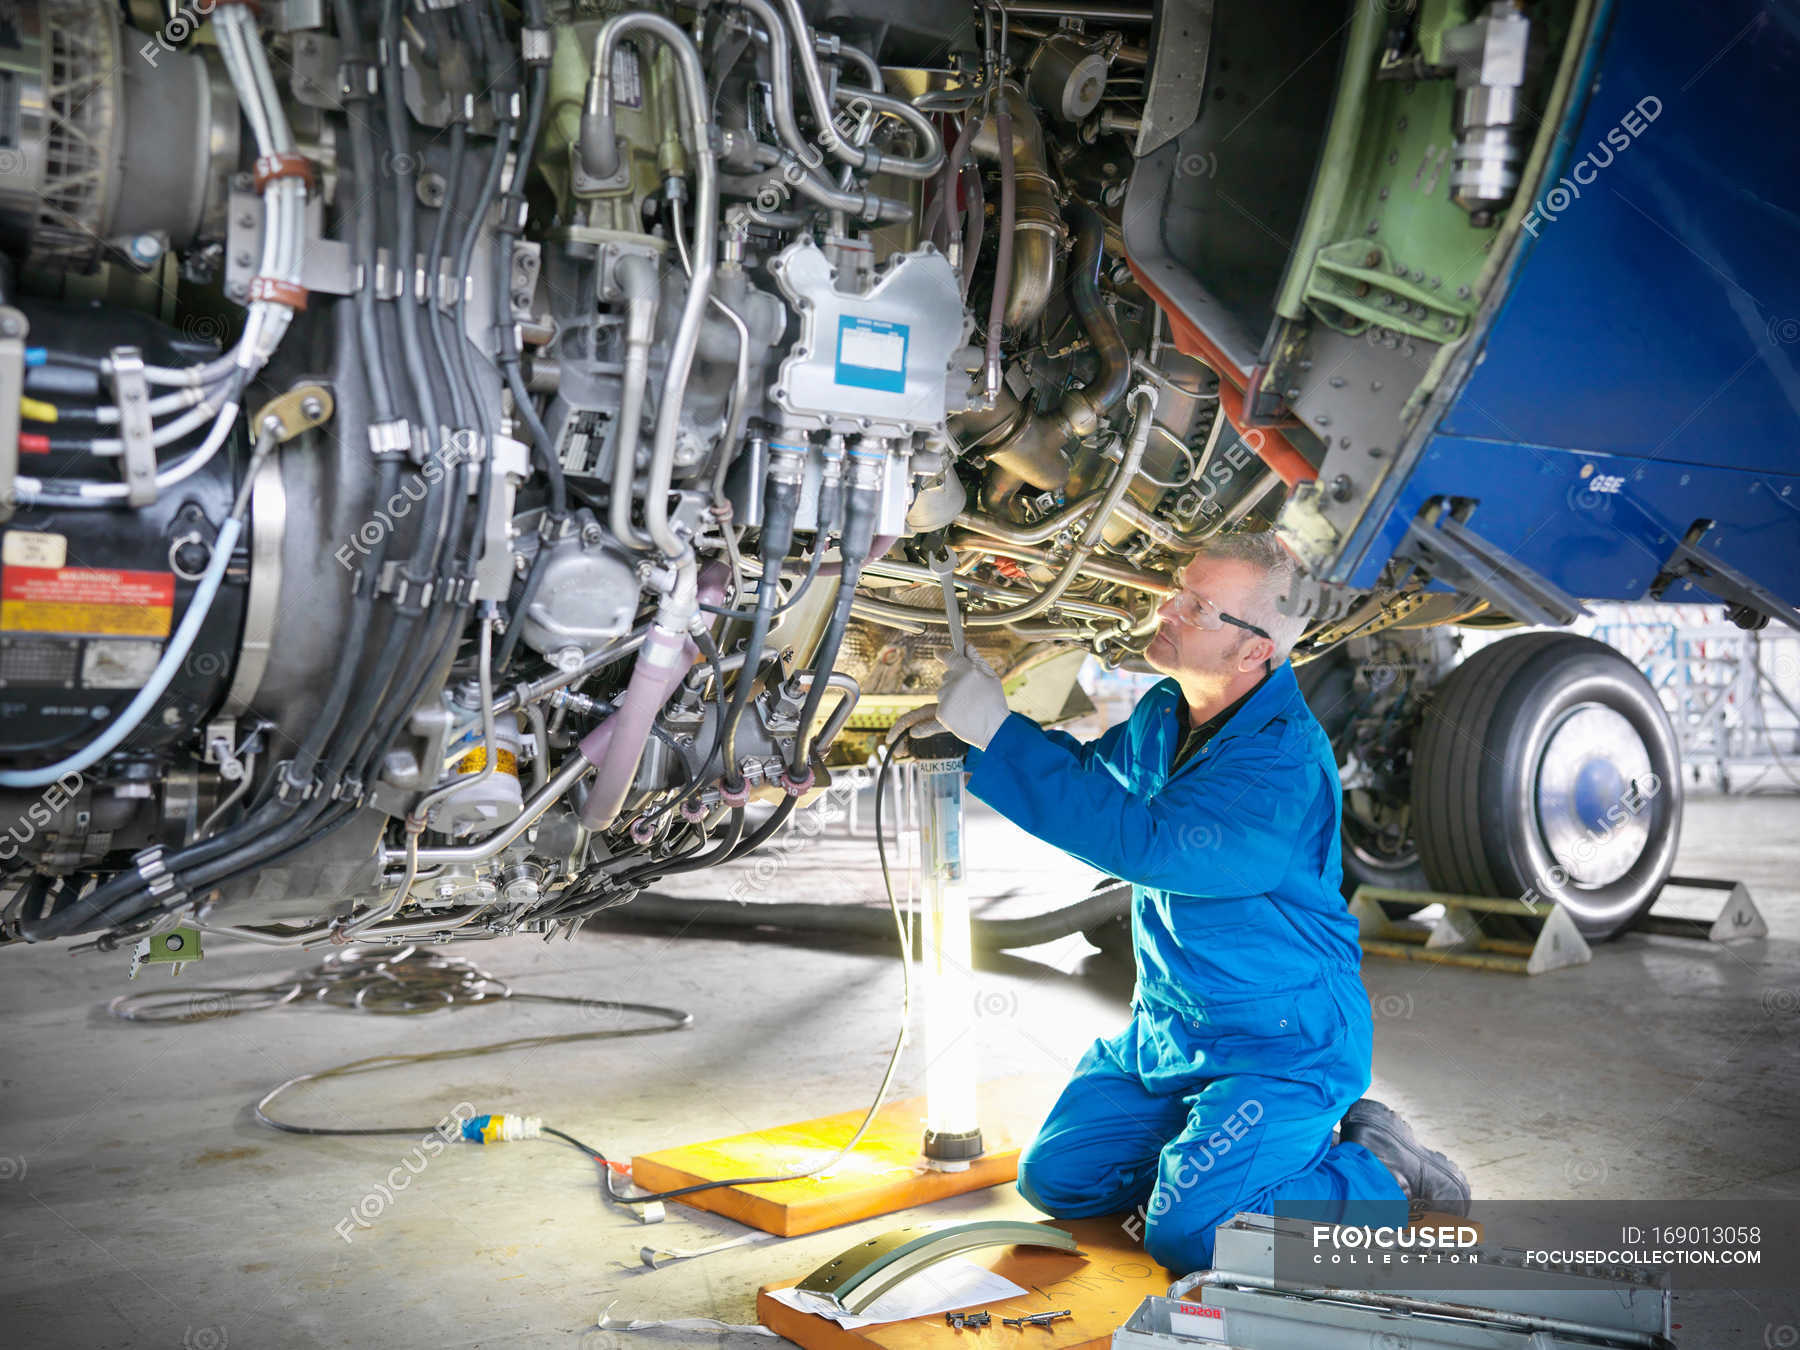 Aircraft engineer working on 737 engine in hangar — occupation, factory -  Stock Photo | #169013058